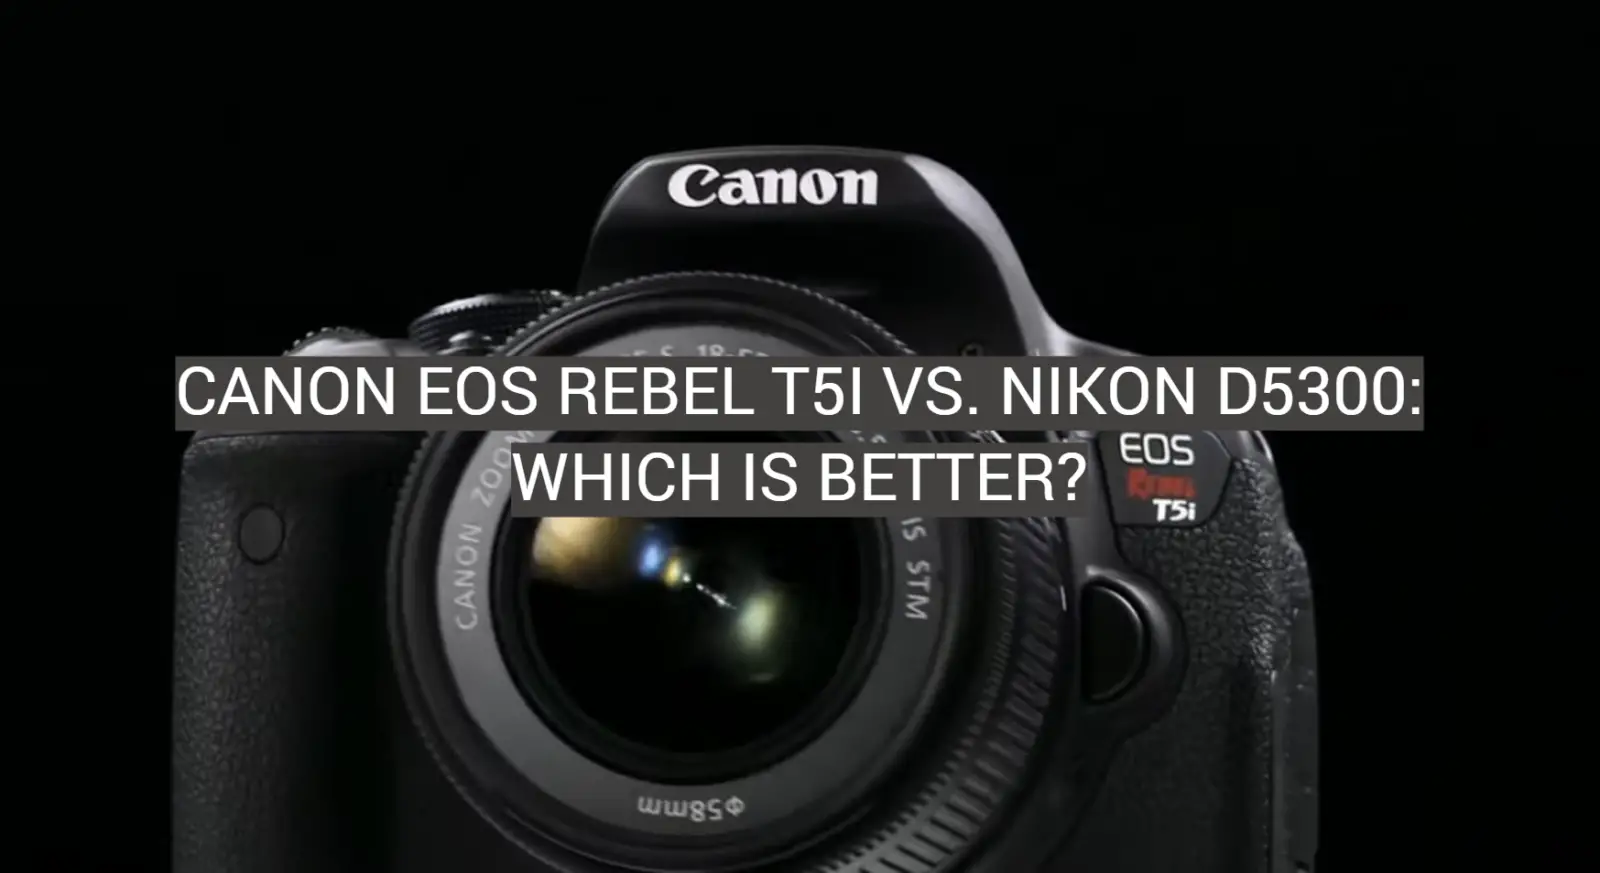 Canon EOS Rebel T5i vs. Nikon D5300: Which is Better?